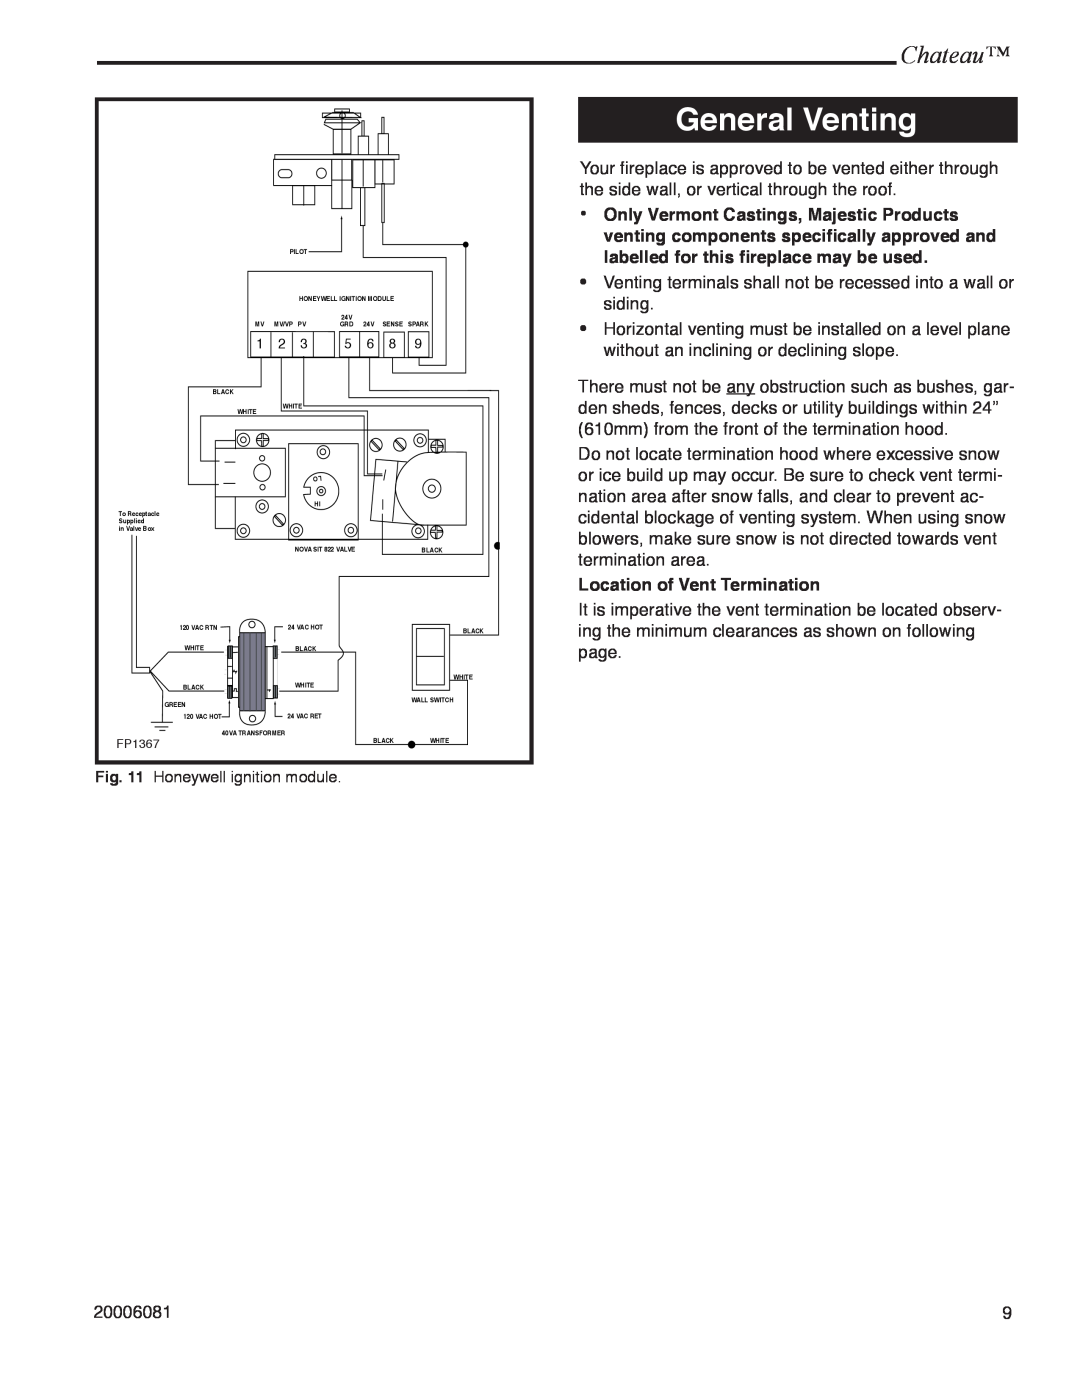 Vermont Casting DVT38 installation instructions General Venting, Chateau, Location of Vent Termination 